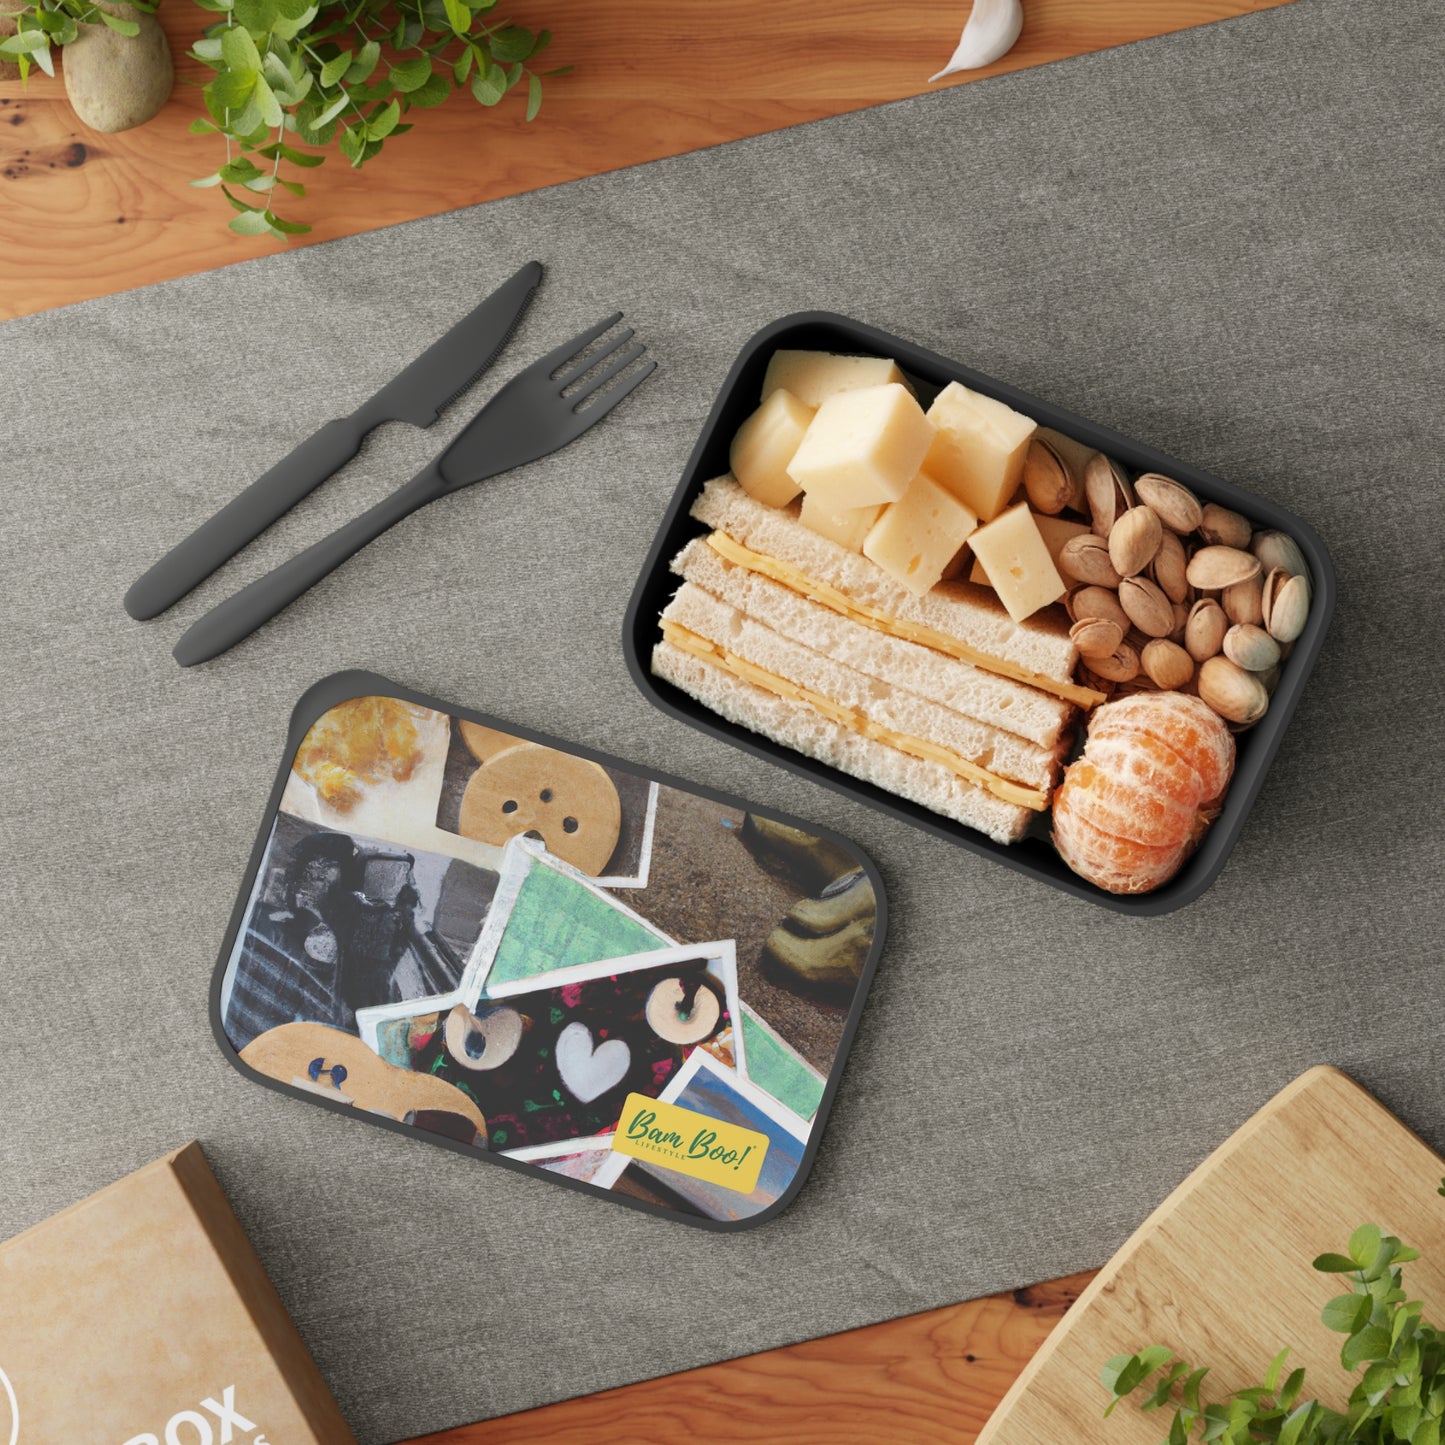 "Memories of My Childhood: A Photographic and Found Artifact Collage" - Bam Boo! Lifestyle Eco-friendly PLA Bento Box with Band and Utensils